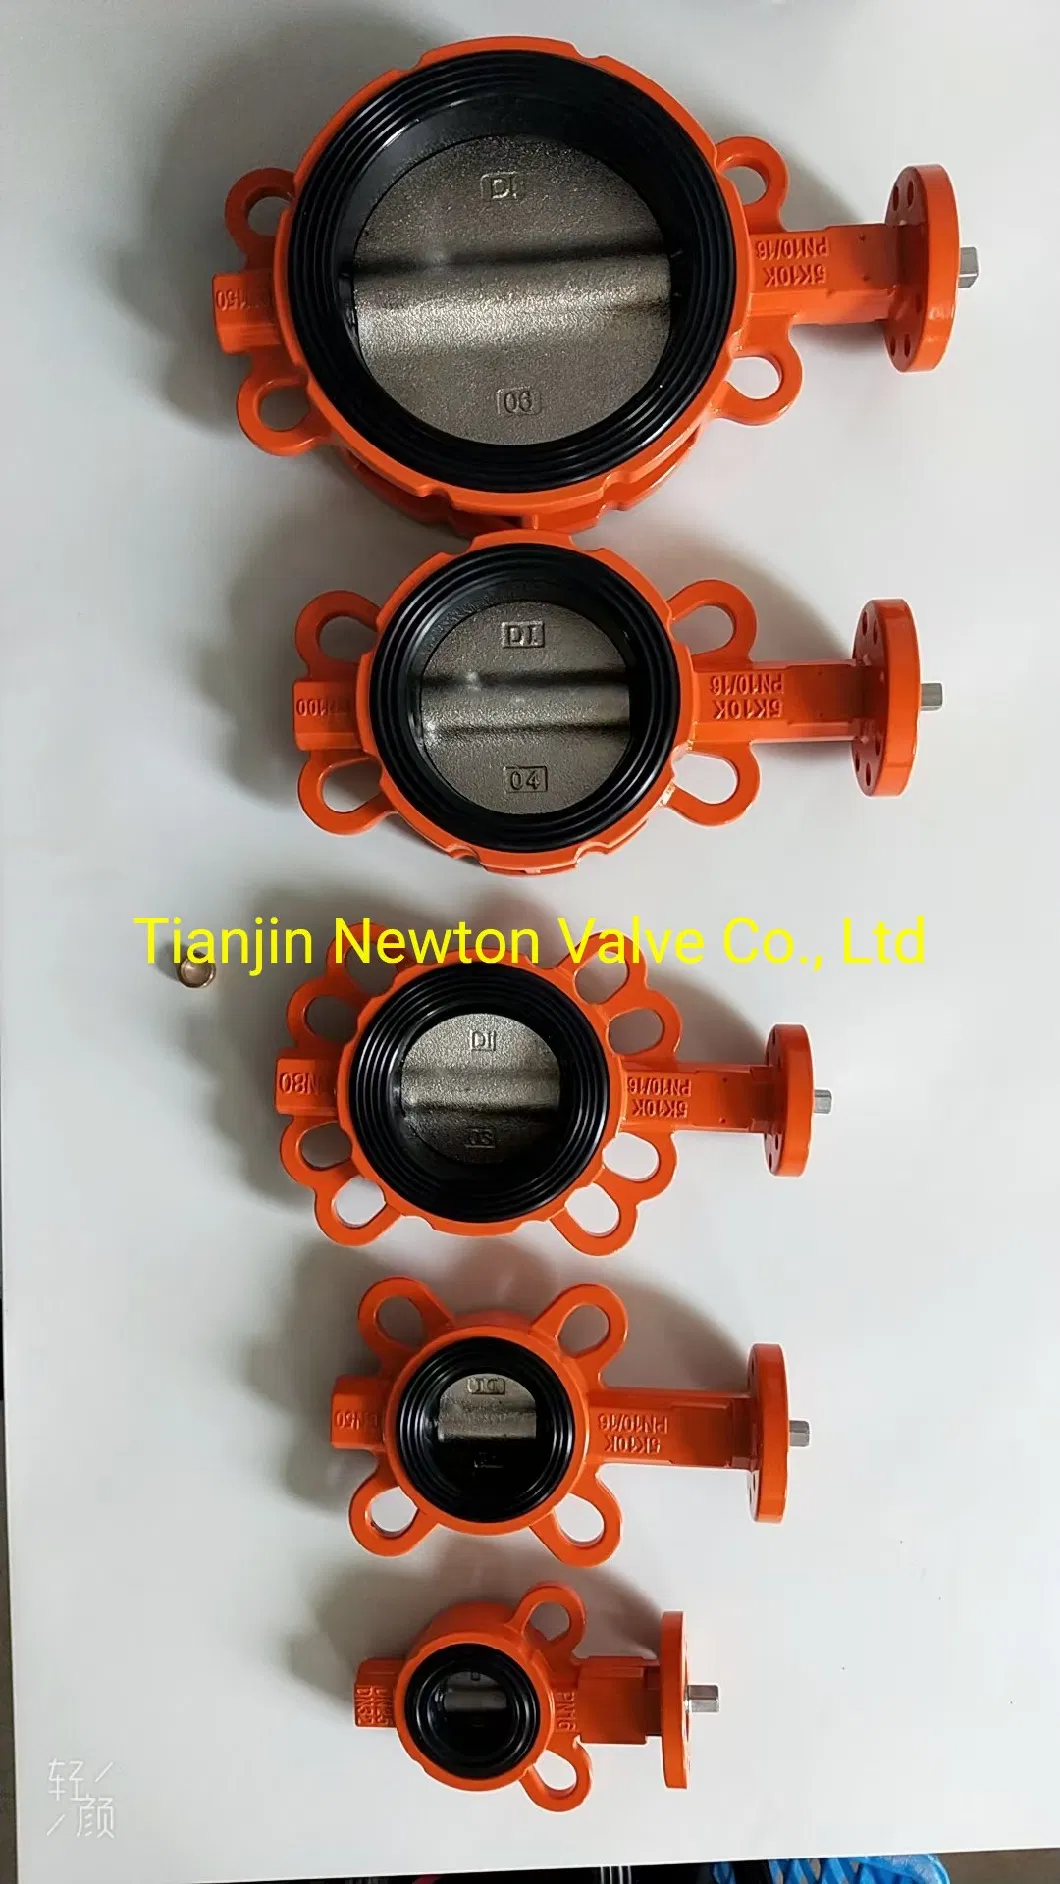 Full Rubber Liner Disc Wafer Butterfly Valve Universal Standard with Electric Actuation